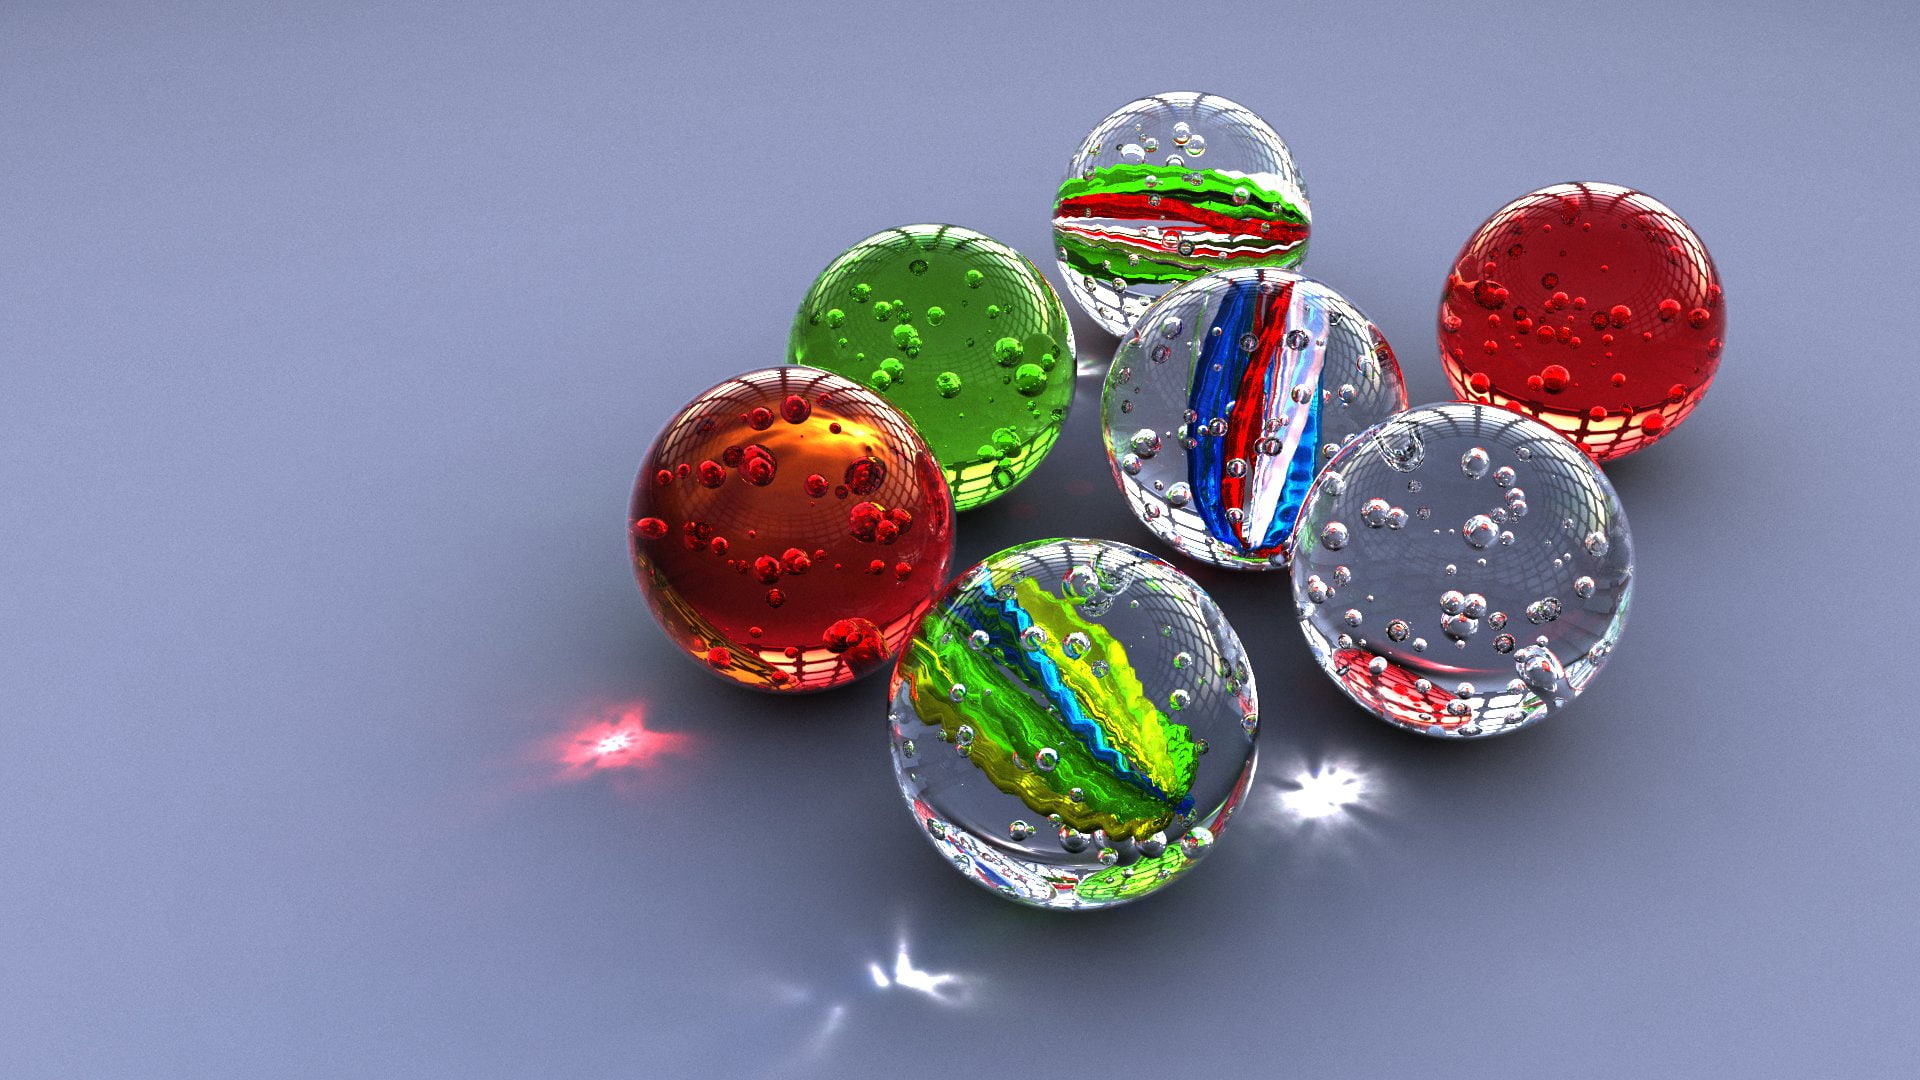 1920x1080 px, ball, bokeh, circle, glass, Marble, Marbles, sphere